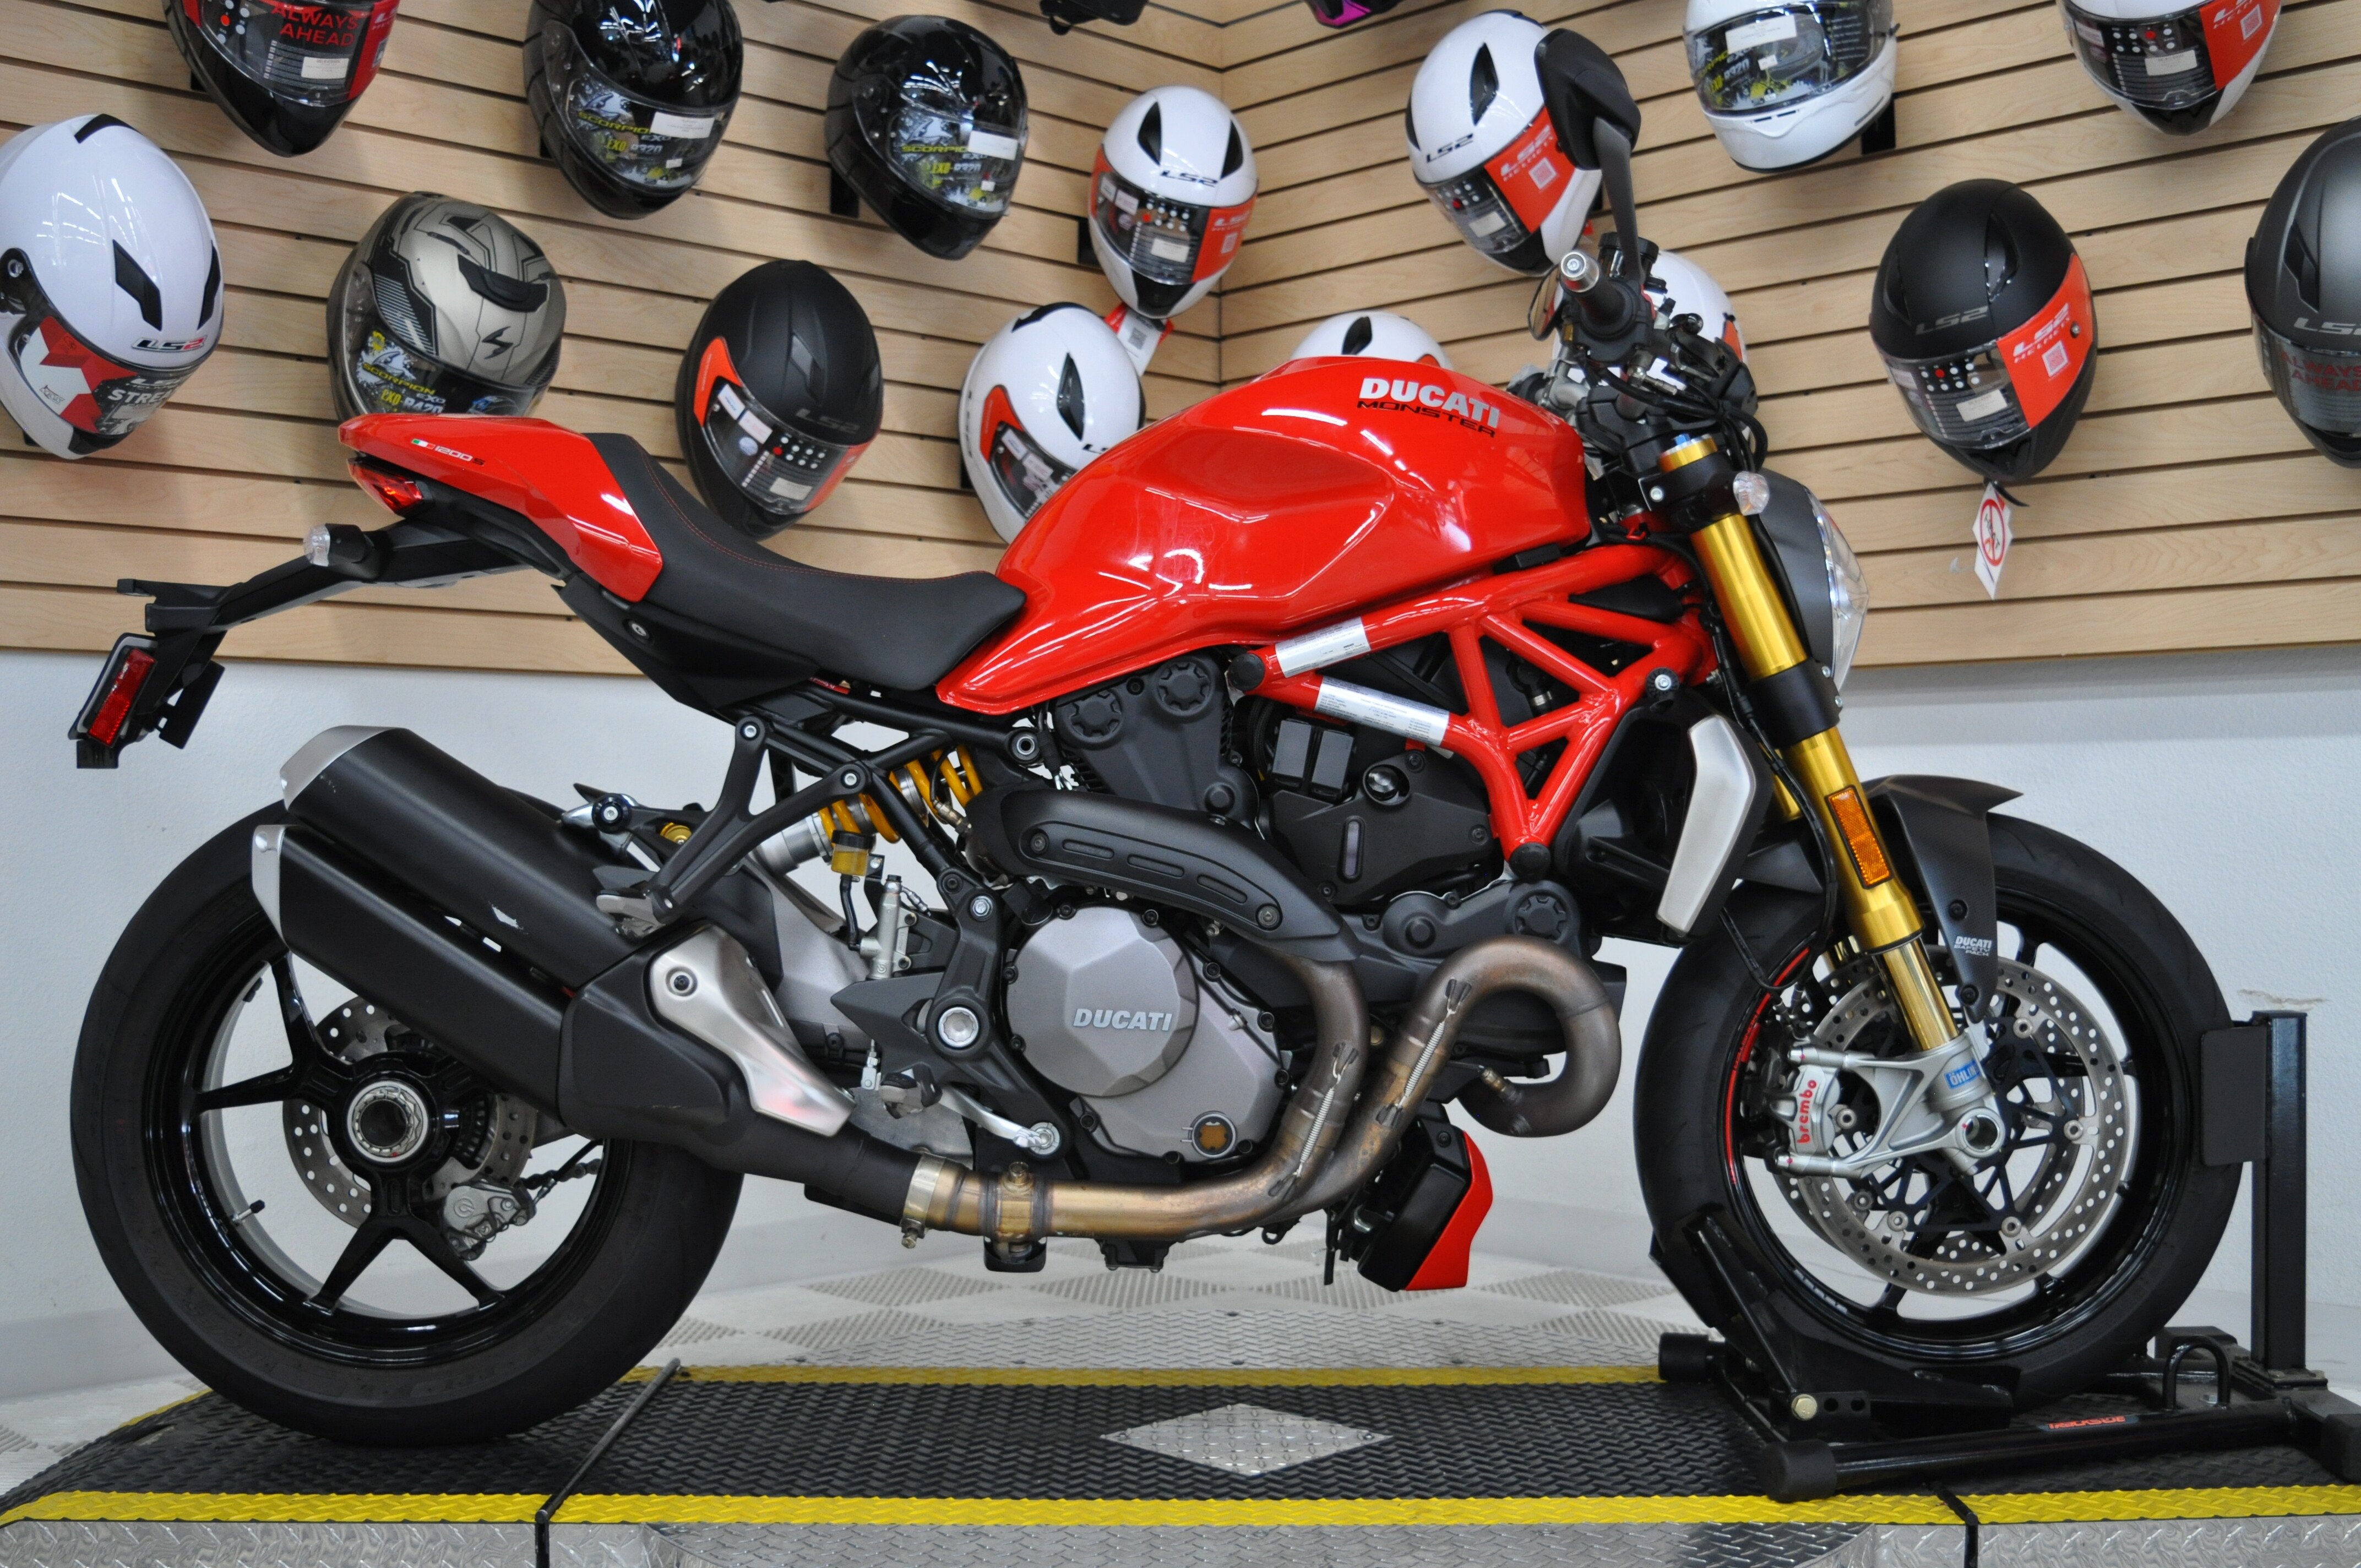 2018 Ducati Monster 1200 Motorcycles for Sale - Motorcycles on Autotrader